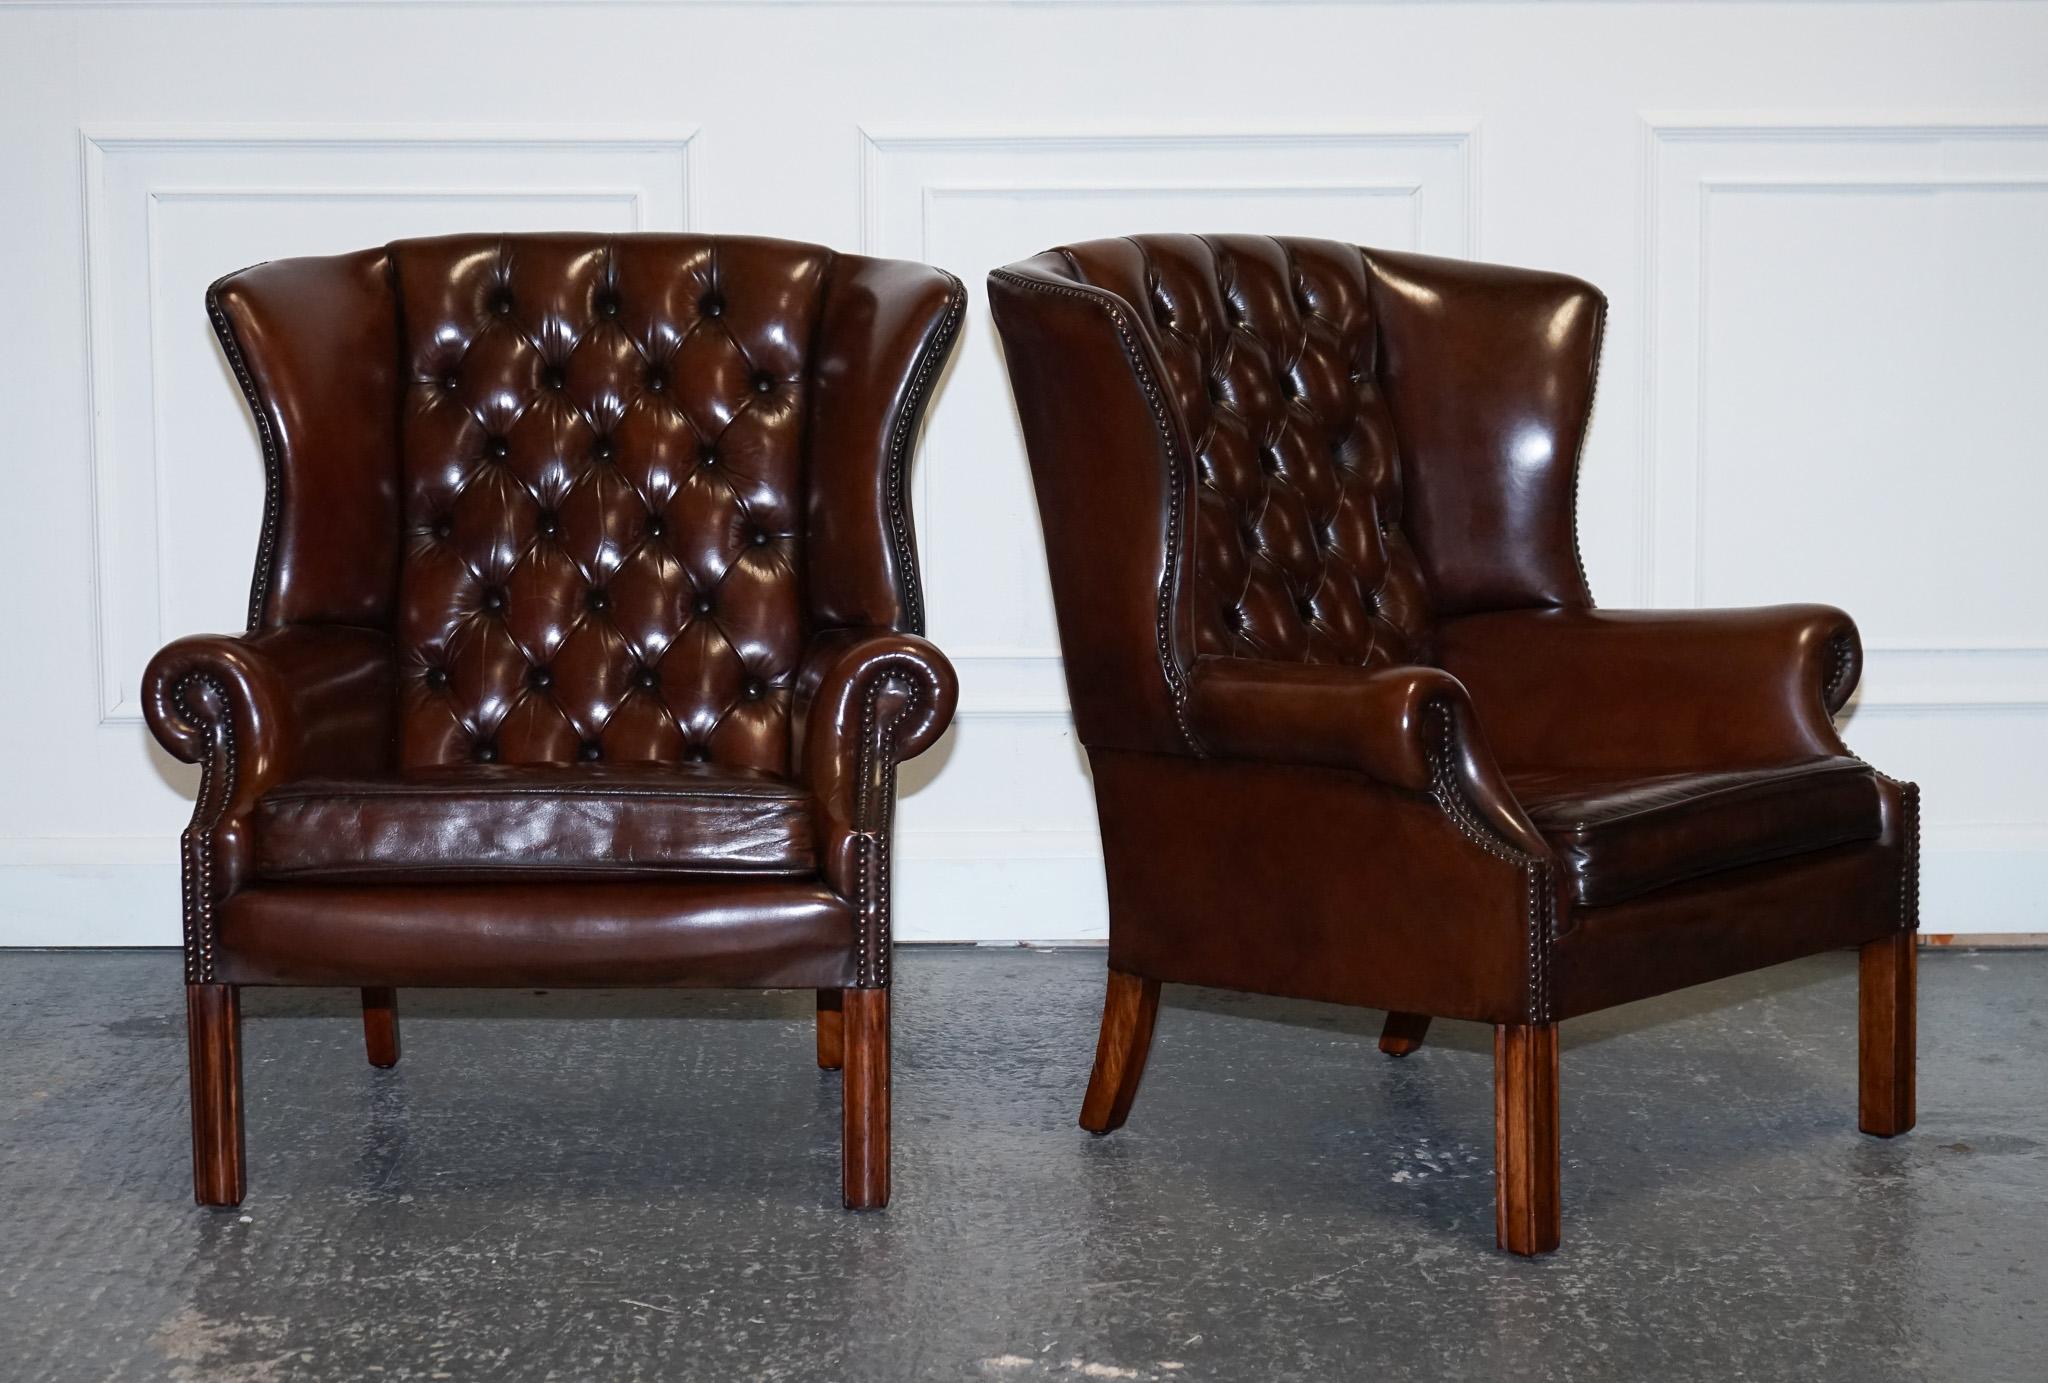 
We are delighted to offer for sale this Gorgeous Pair of Hand Dyed Whiskey Brown Leather Wingbacks Georgian Style.

As mentioned, these chairs are fully restored, our leather polishers have lightly stripped them back and then hand dyed both this